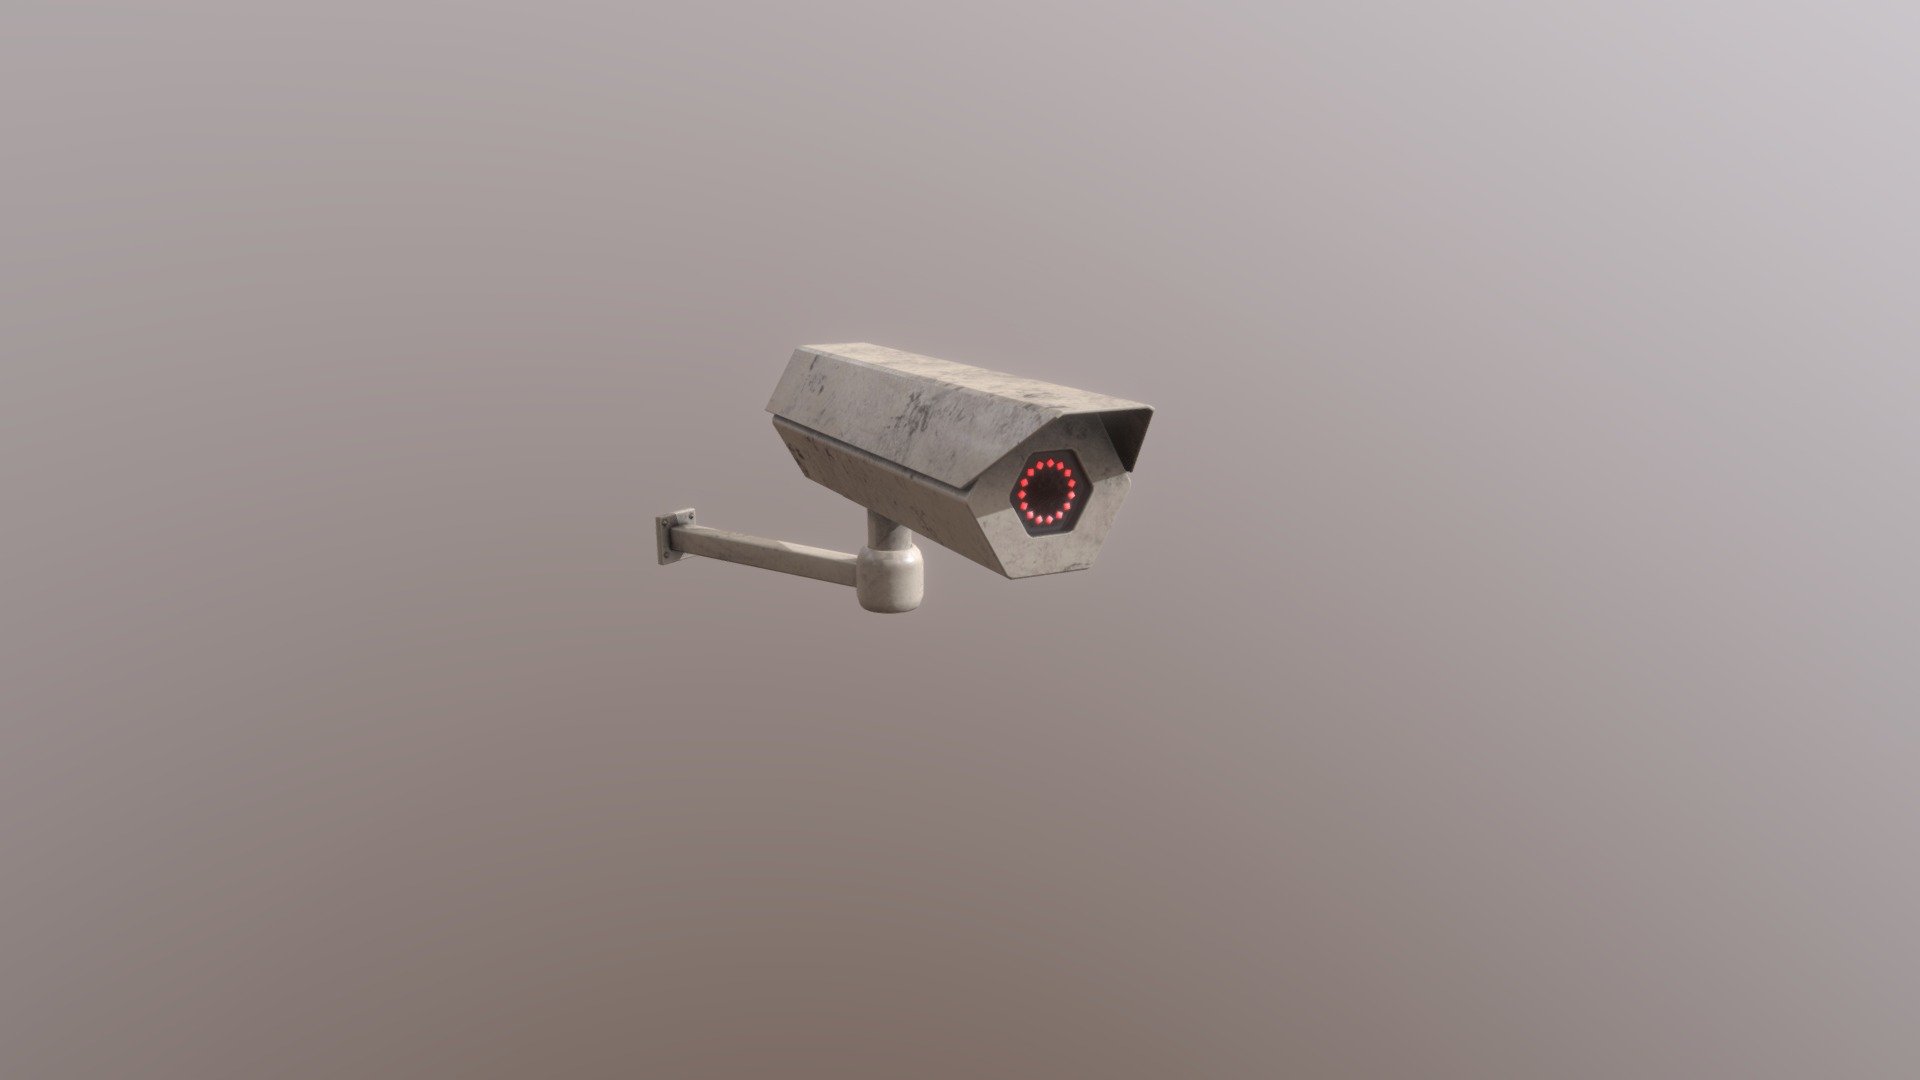 Surveillance camera modeled in Maya and textured in Substance Painter for my Cyberpunk City project: https://www.artstation.com/artwork/6bEmAr - Surveillance Camera - 3D model by ManlioRF 3d model